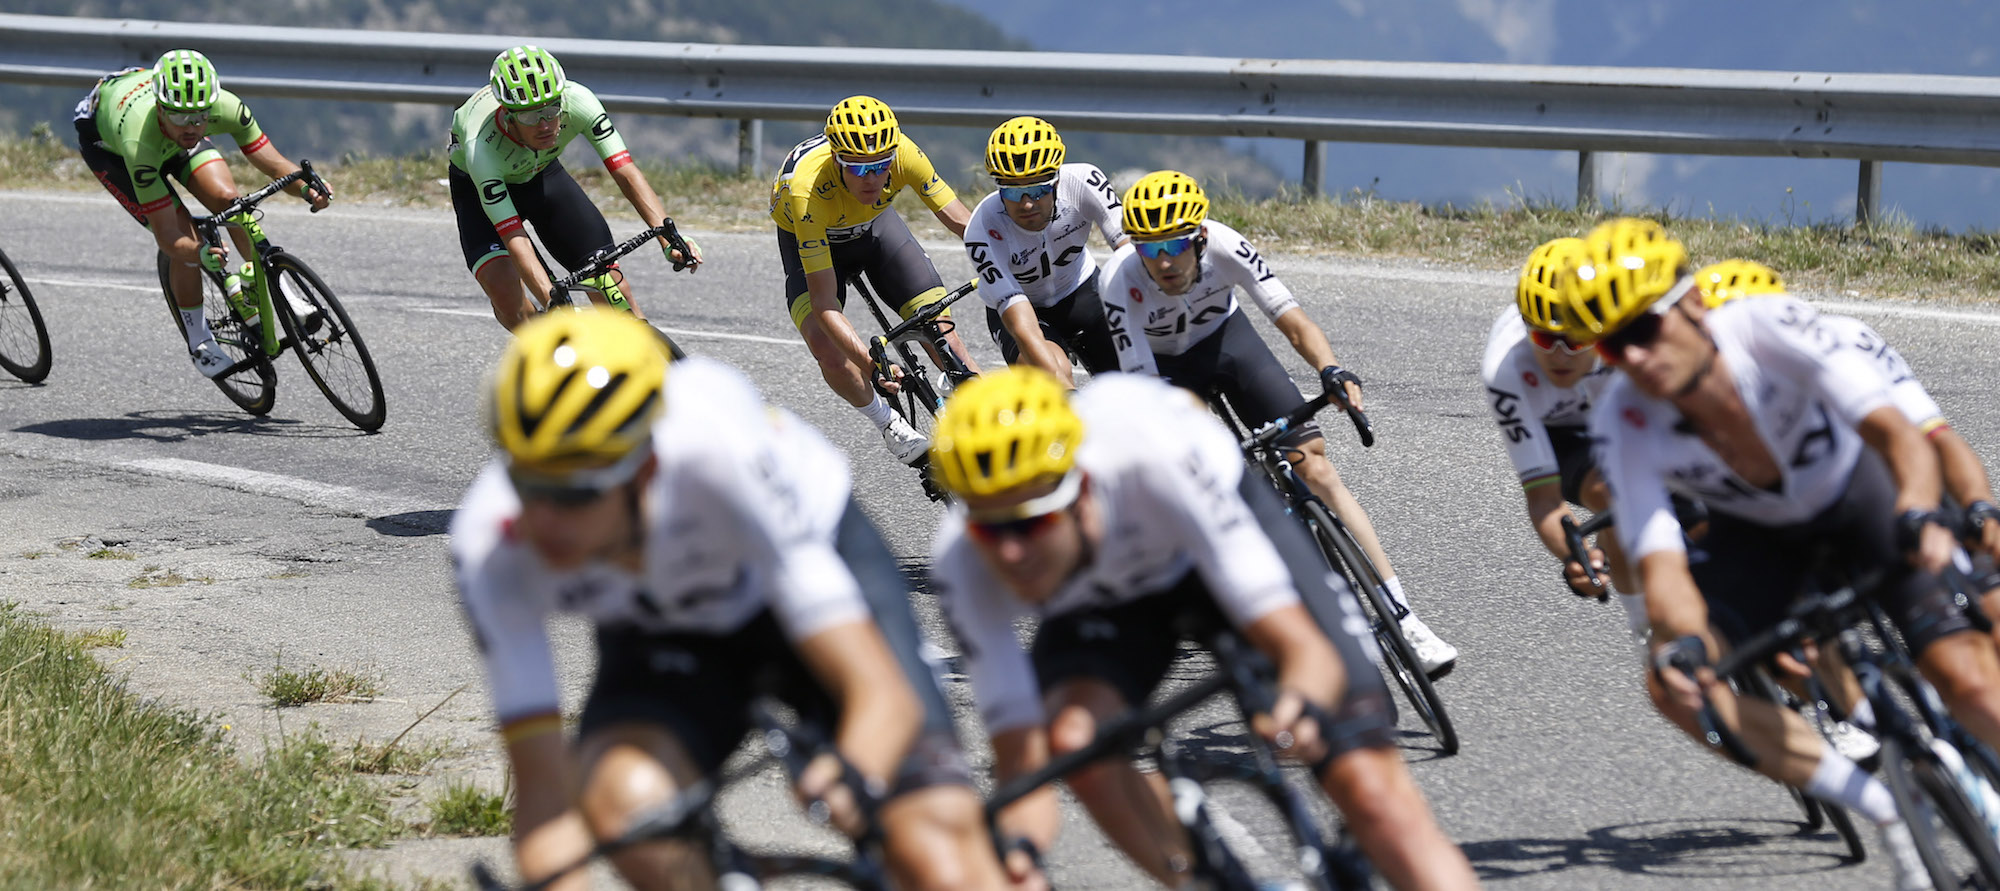 Team Sky to wear special 'Orca' jersey at Tour de France